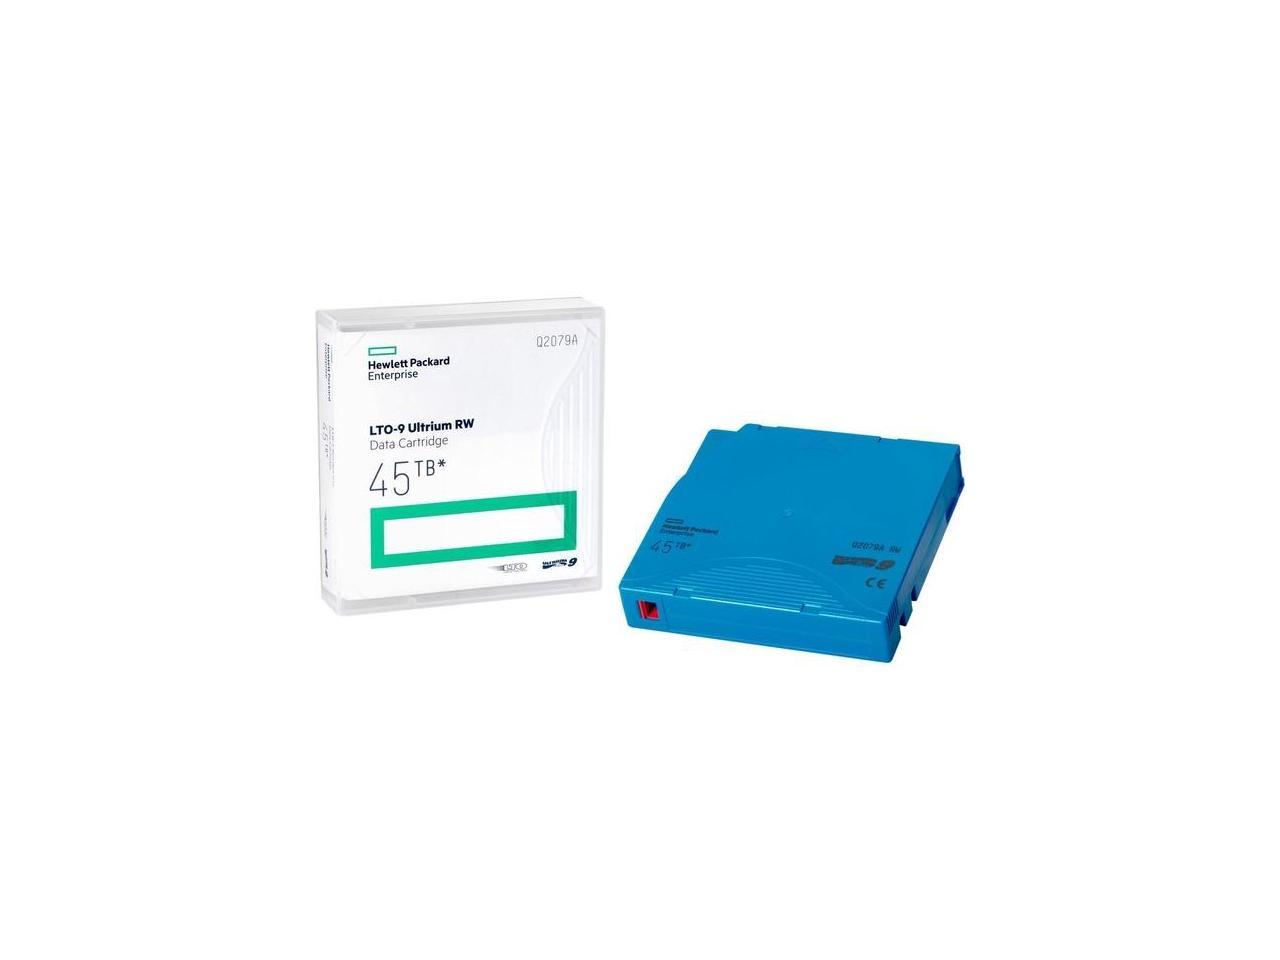 HPE LTO-9 Ultrium 45TB RW Non custom Labeled 20 Data cartridges with cases Q2079AN